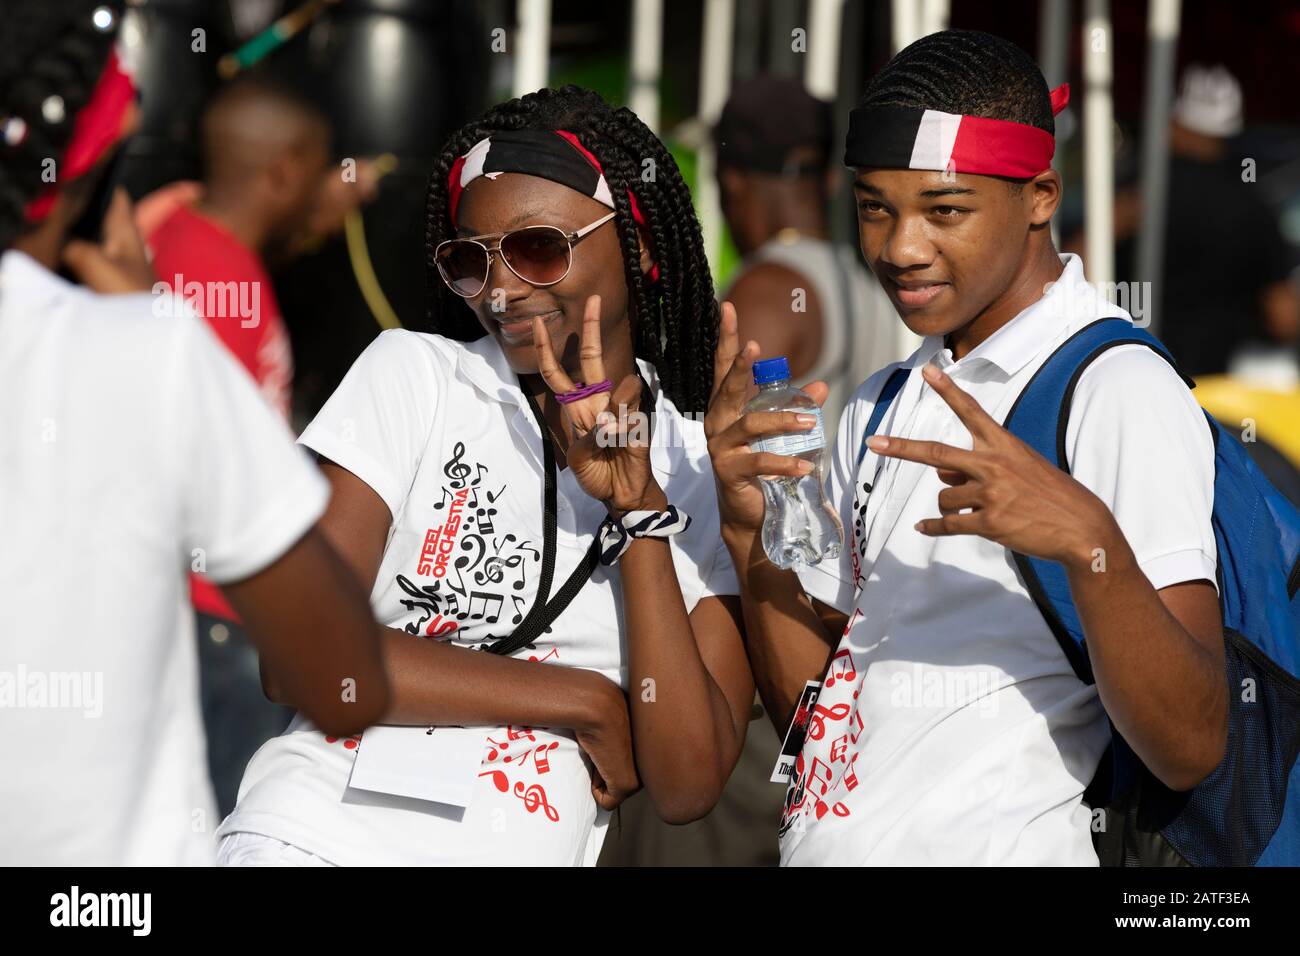 Young people posing for a selfie, Port of Spain, Trinidad & Tobago Stock Photo